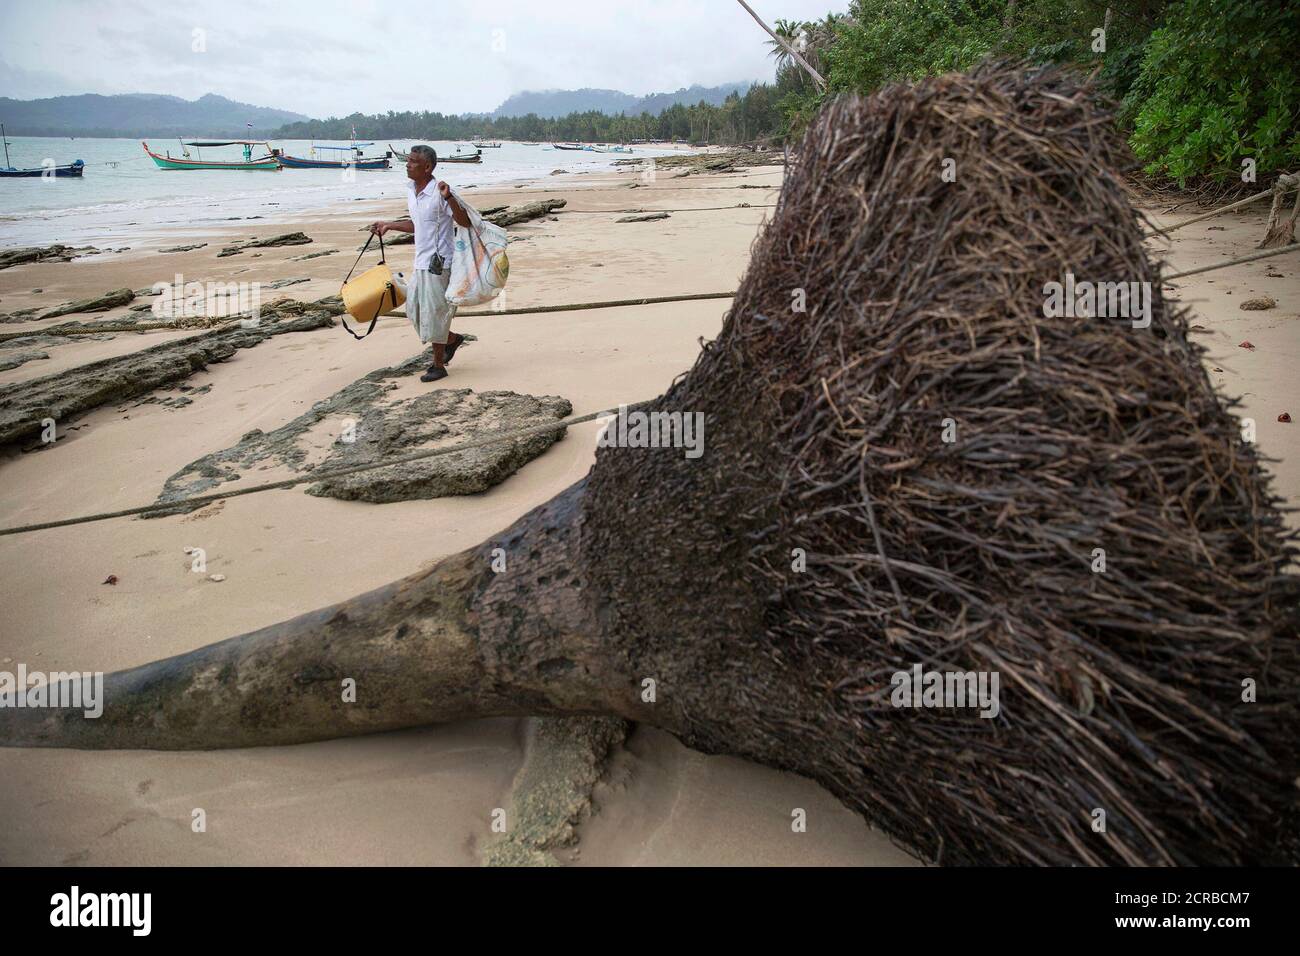 Hong Klathalay carries gear to his fishing boat as he walks past a tree brought down by the 2004 tsunami in Khao Lak, Phang Nga province December 14, 2014. Hong Klathalay, a 48-year-old community leader in the ethnic Moklen village of Thung Wa in Phang Nga province, said the tsunami put an abrupt stop to tourism development, granting them unfettered access to the sea and time to resume their traditional way of life. With tourism making a comeback in the area, the Moklens fear their way of life on the coast, with the sea, is on the brink of extinction. Picture taken December 14, 2014. REUTERS/D Stock Photo